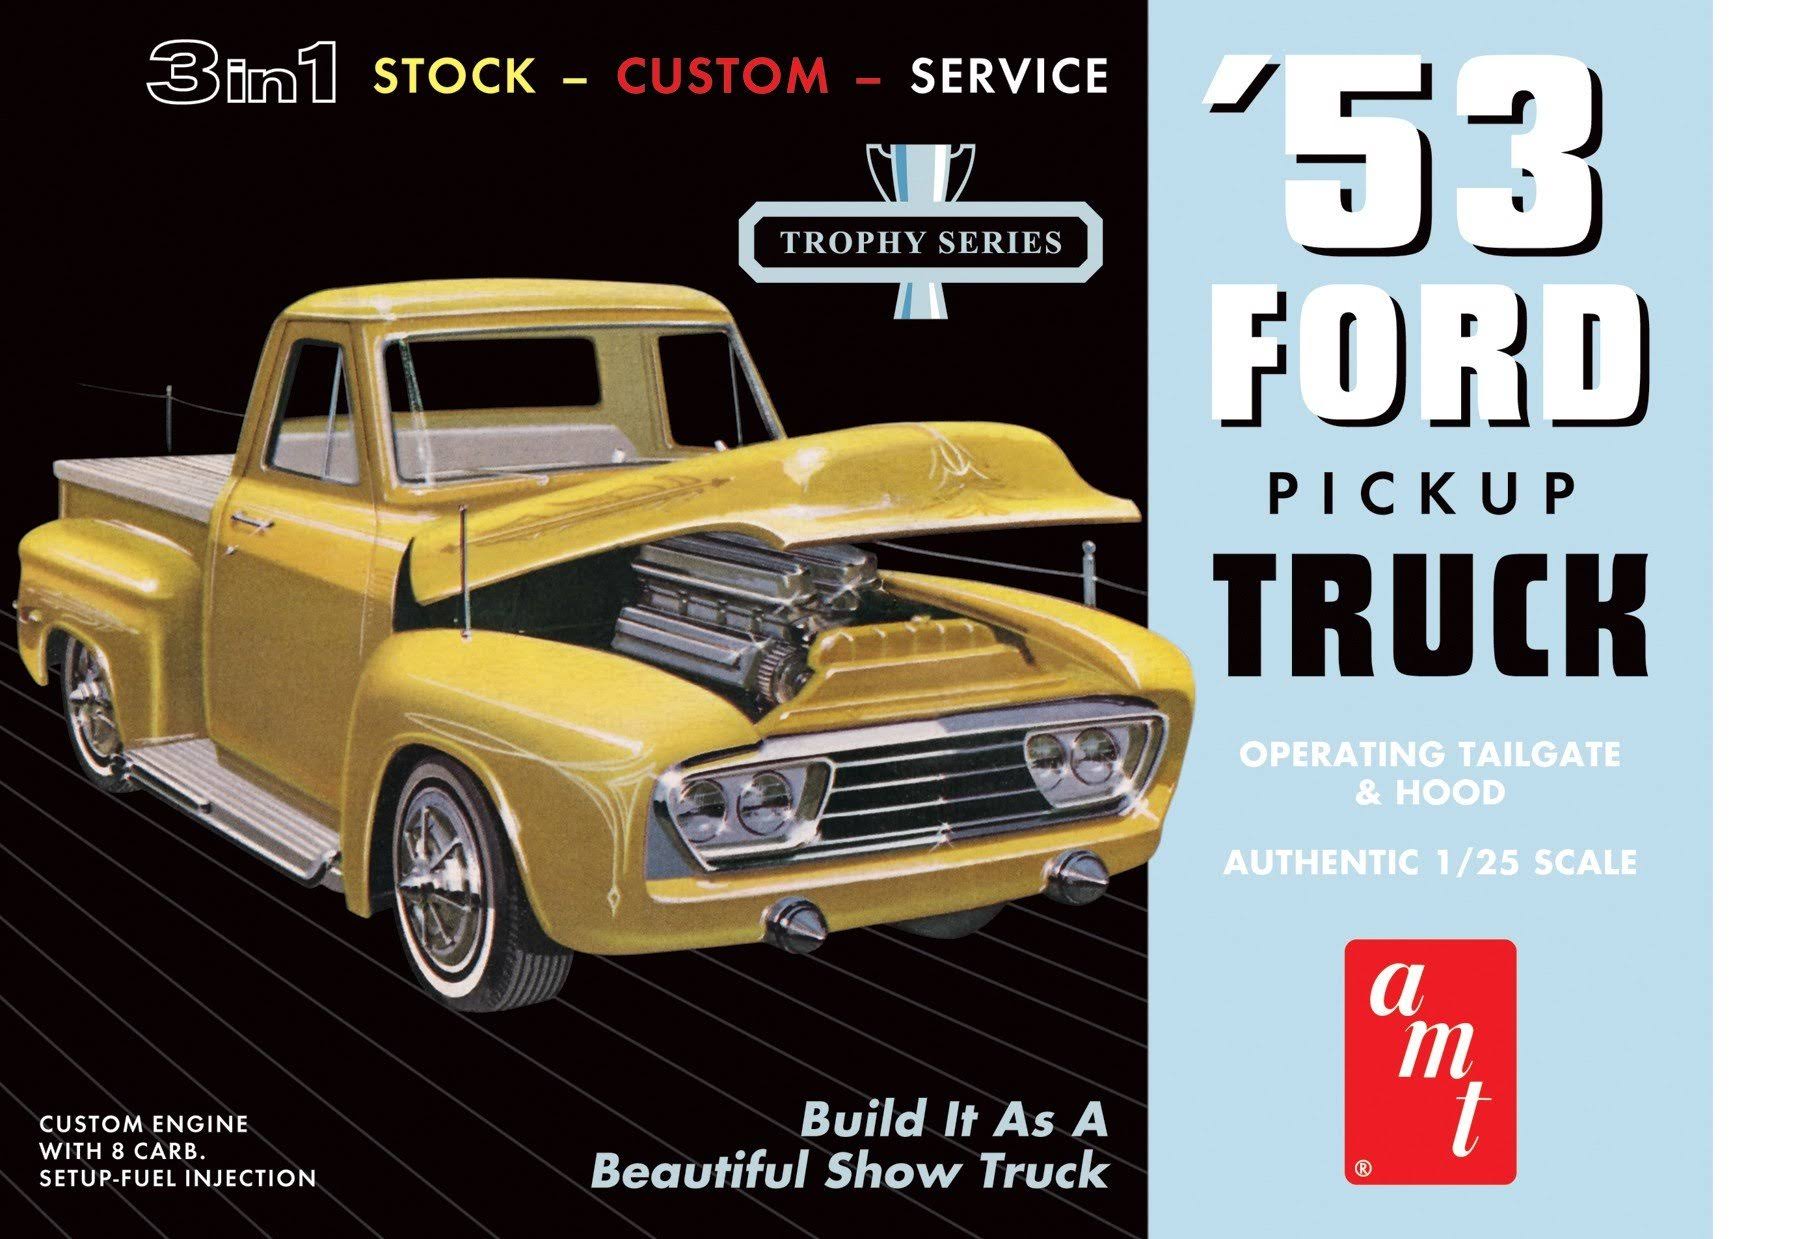 AMT 1953 Ford Pickup Truck 2 in 1 Customizing Model Kit - 1:25 Scale